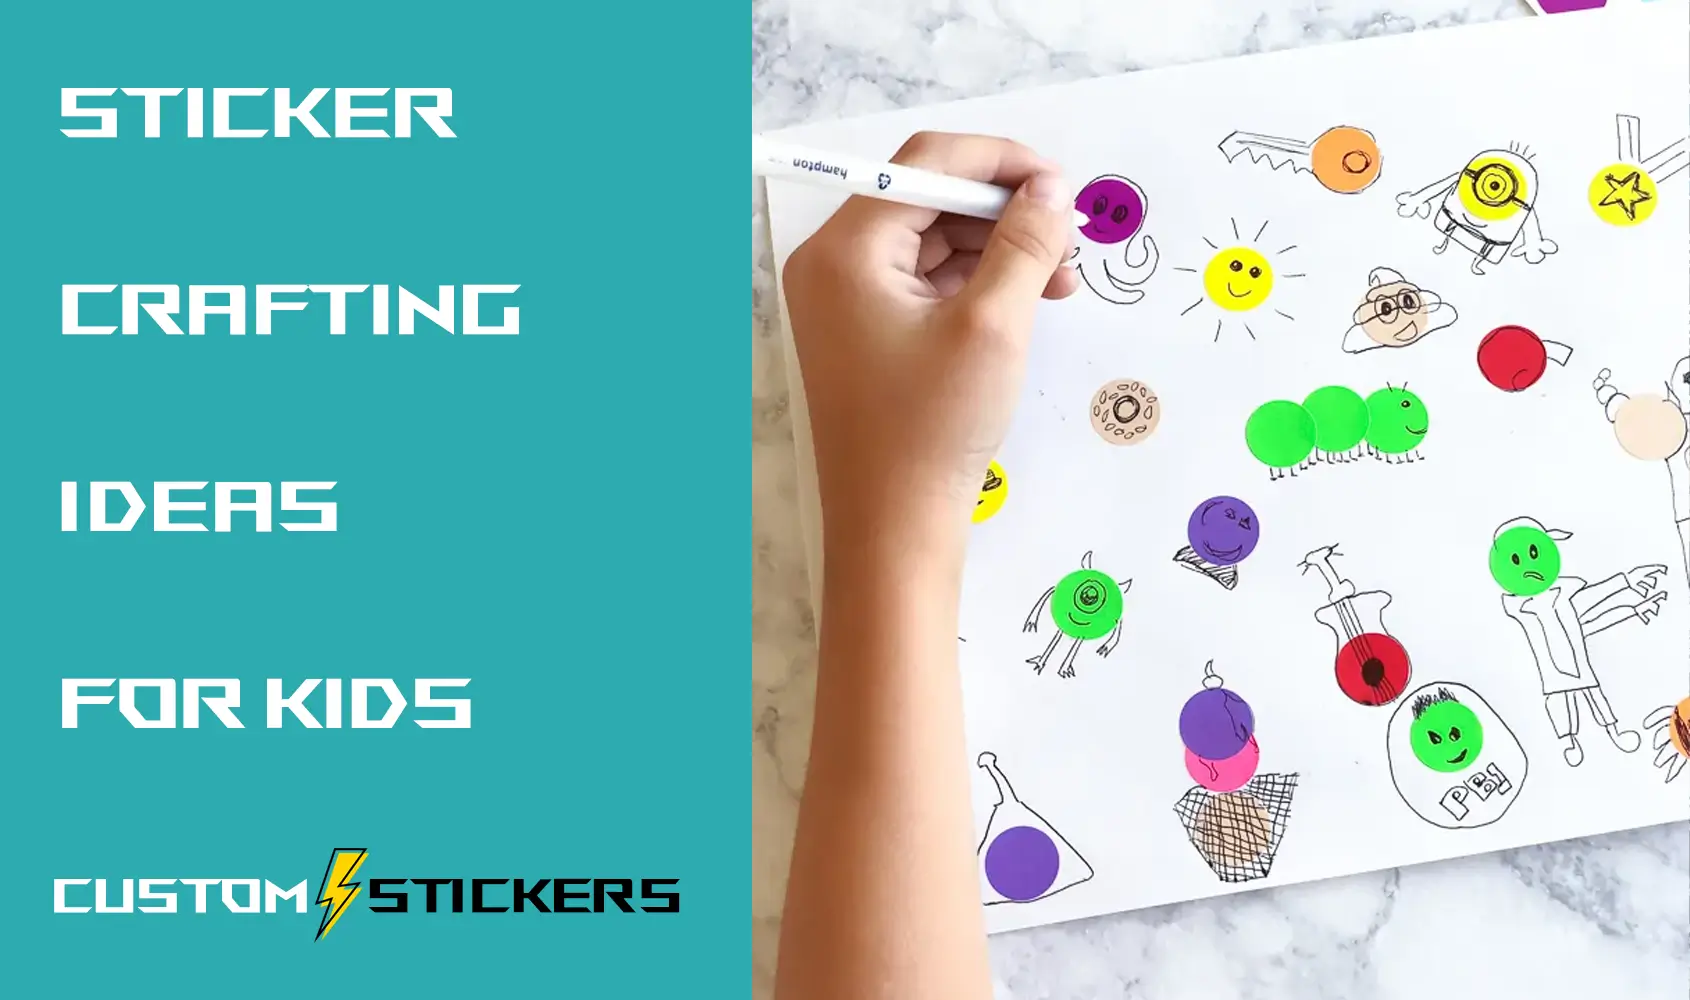 How to use Stickers for Children's Crafts